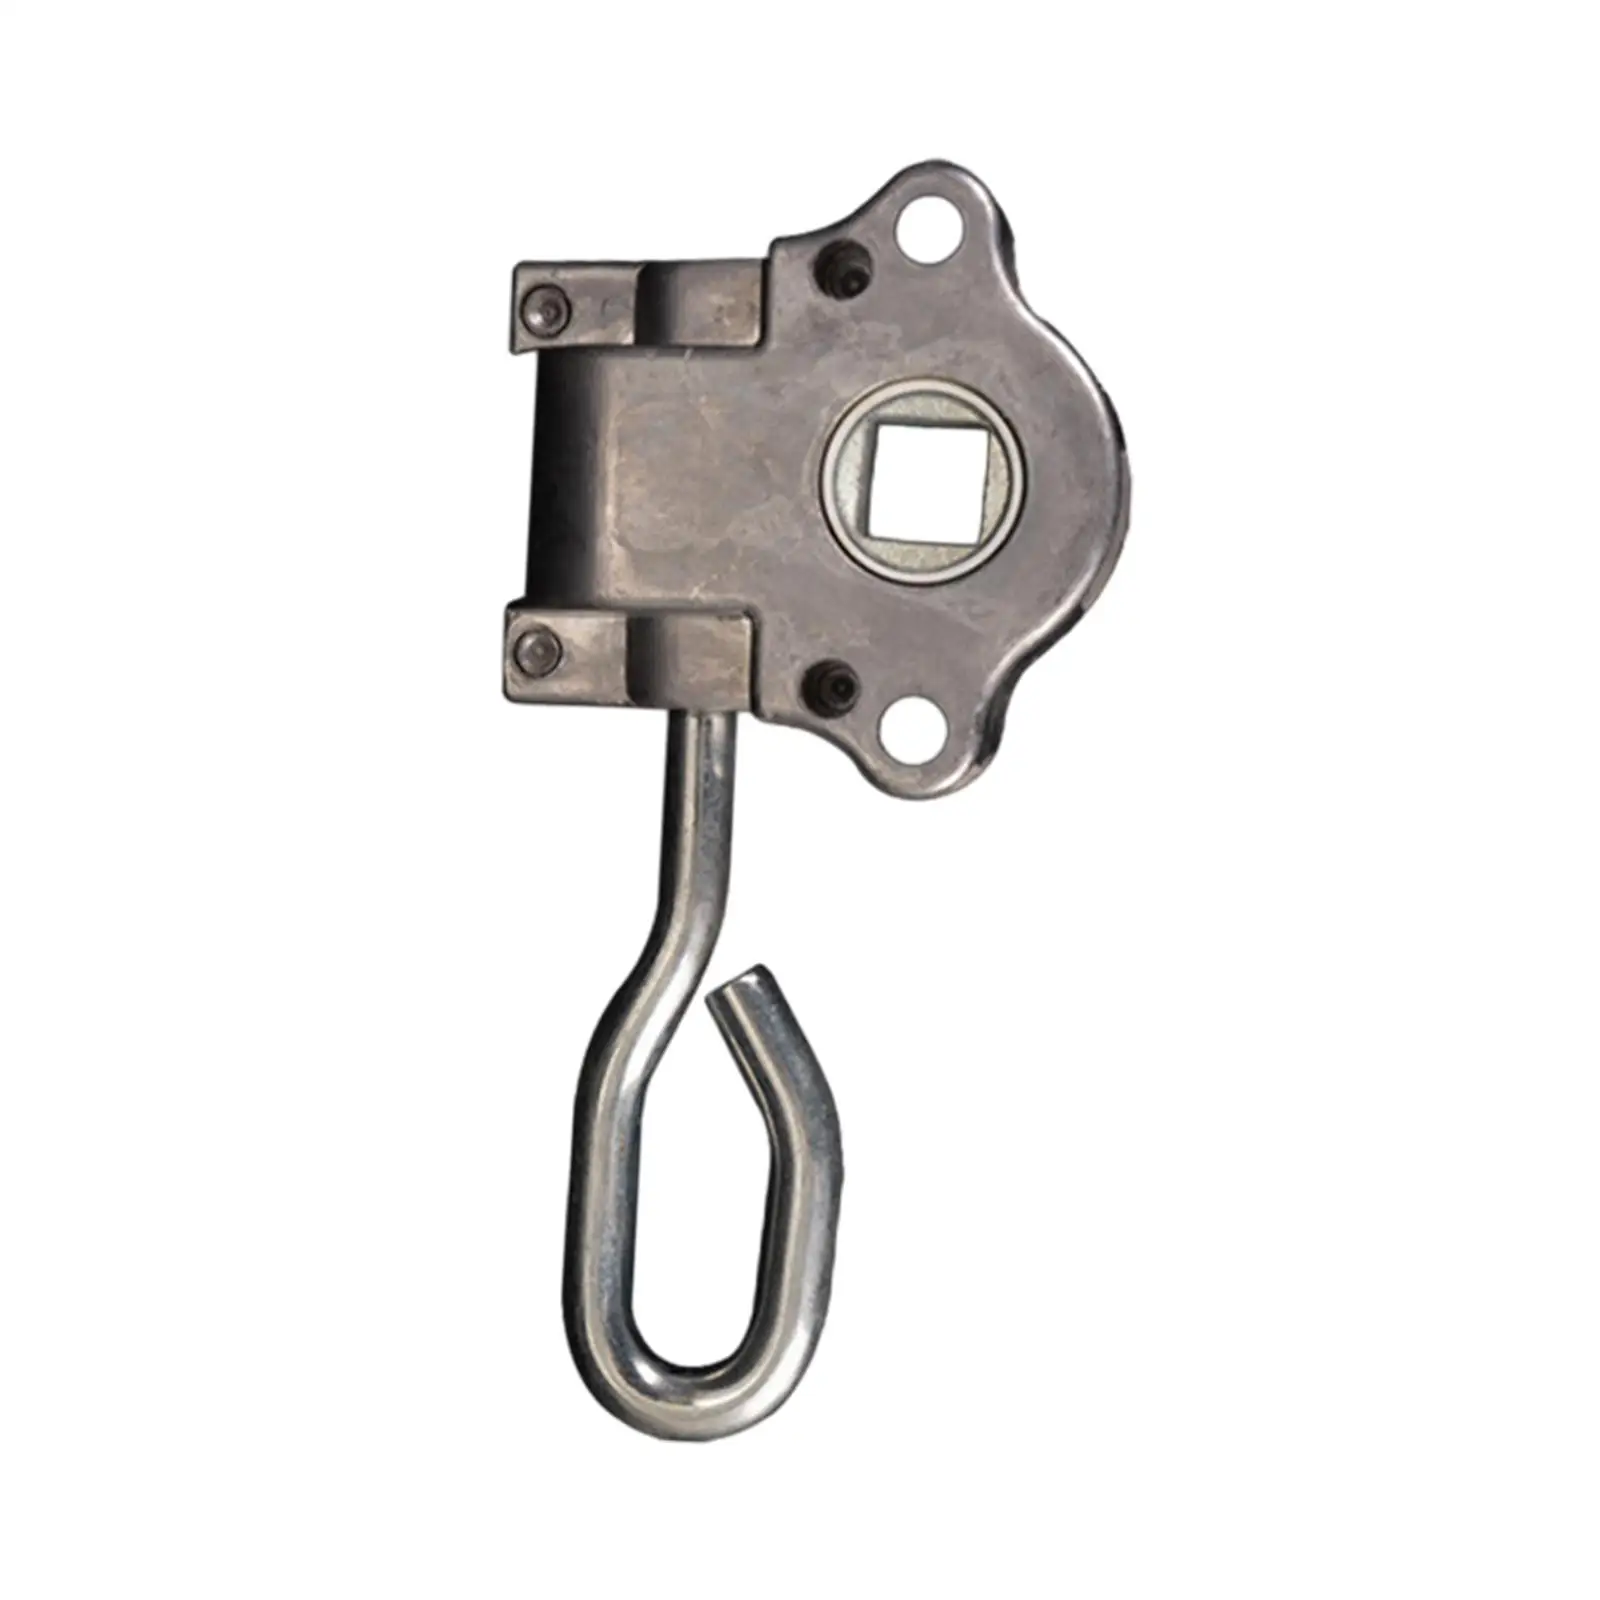 Outdoor Awning Crank Gearbox Accessory Aluminium Alloy Lightweight Universal Easily Install 360 Degree Rotation Hardware